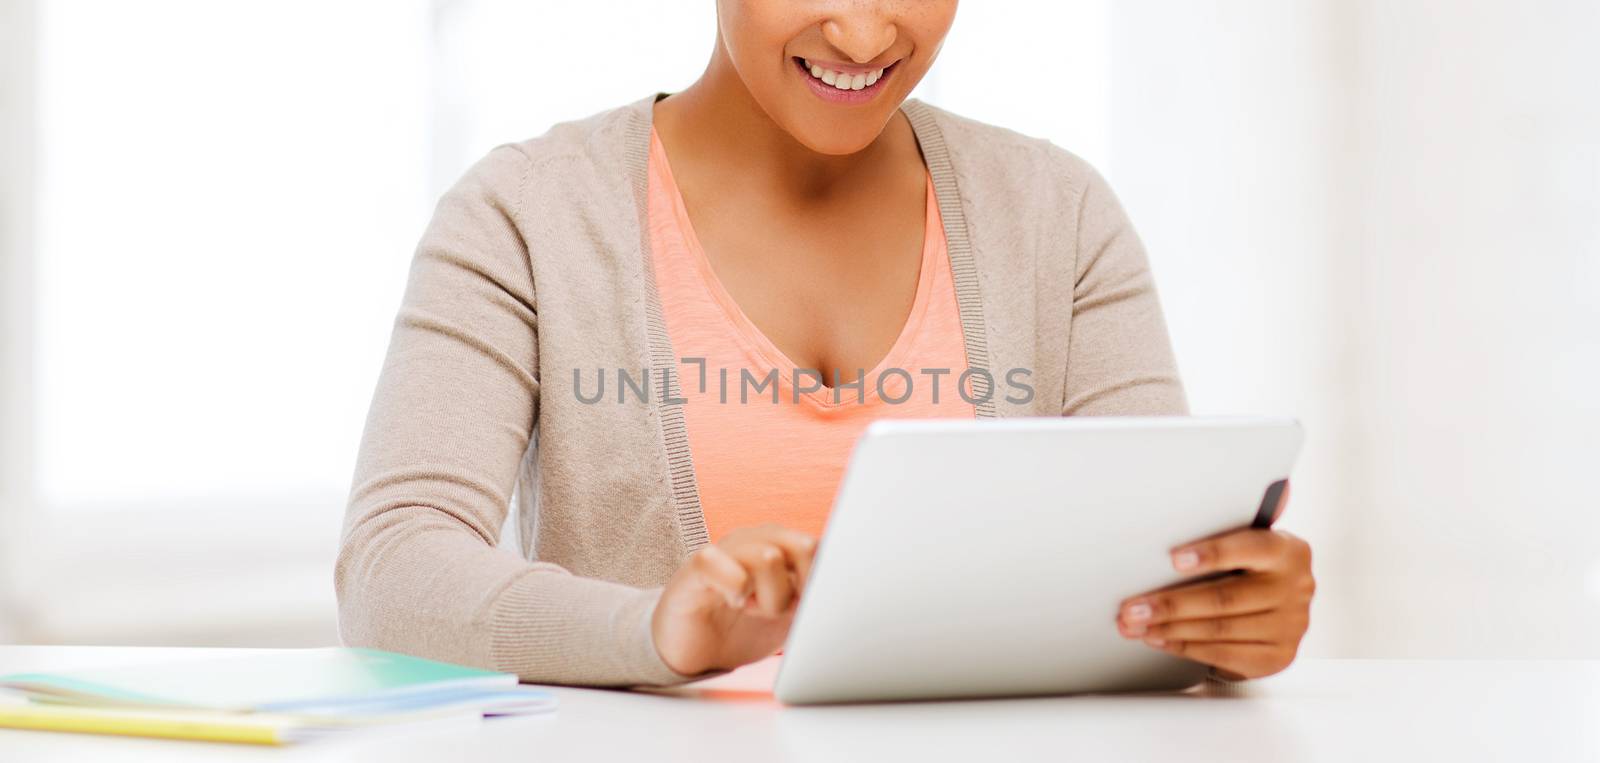 business and education concept - smiling student girl with tablet pc